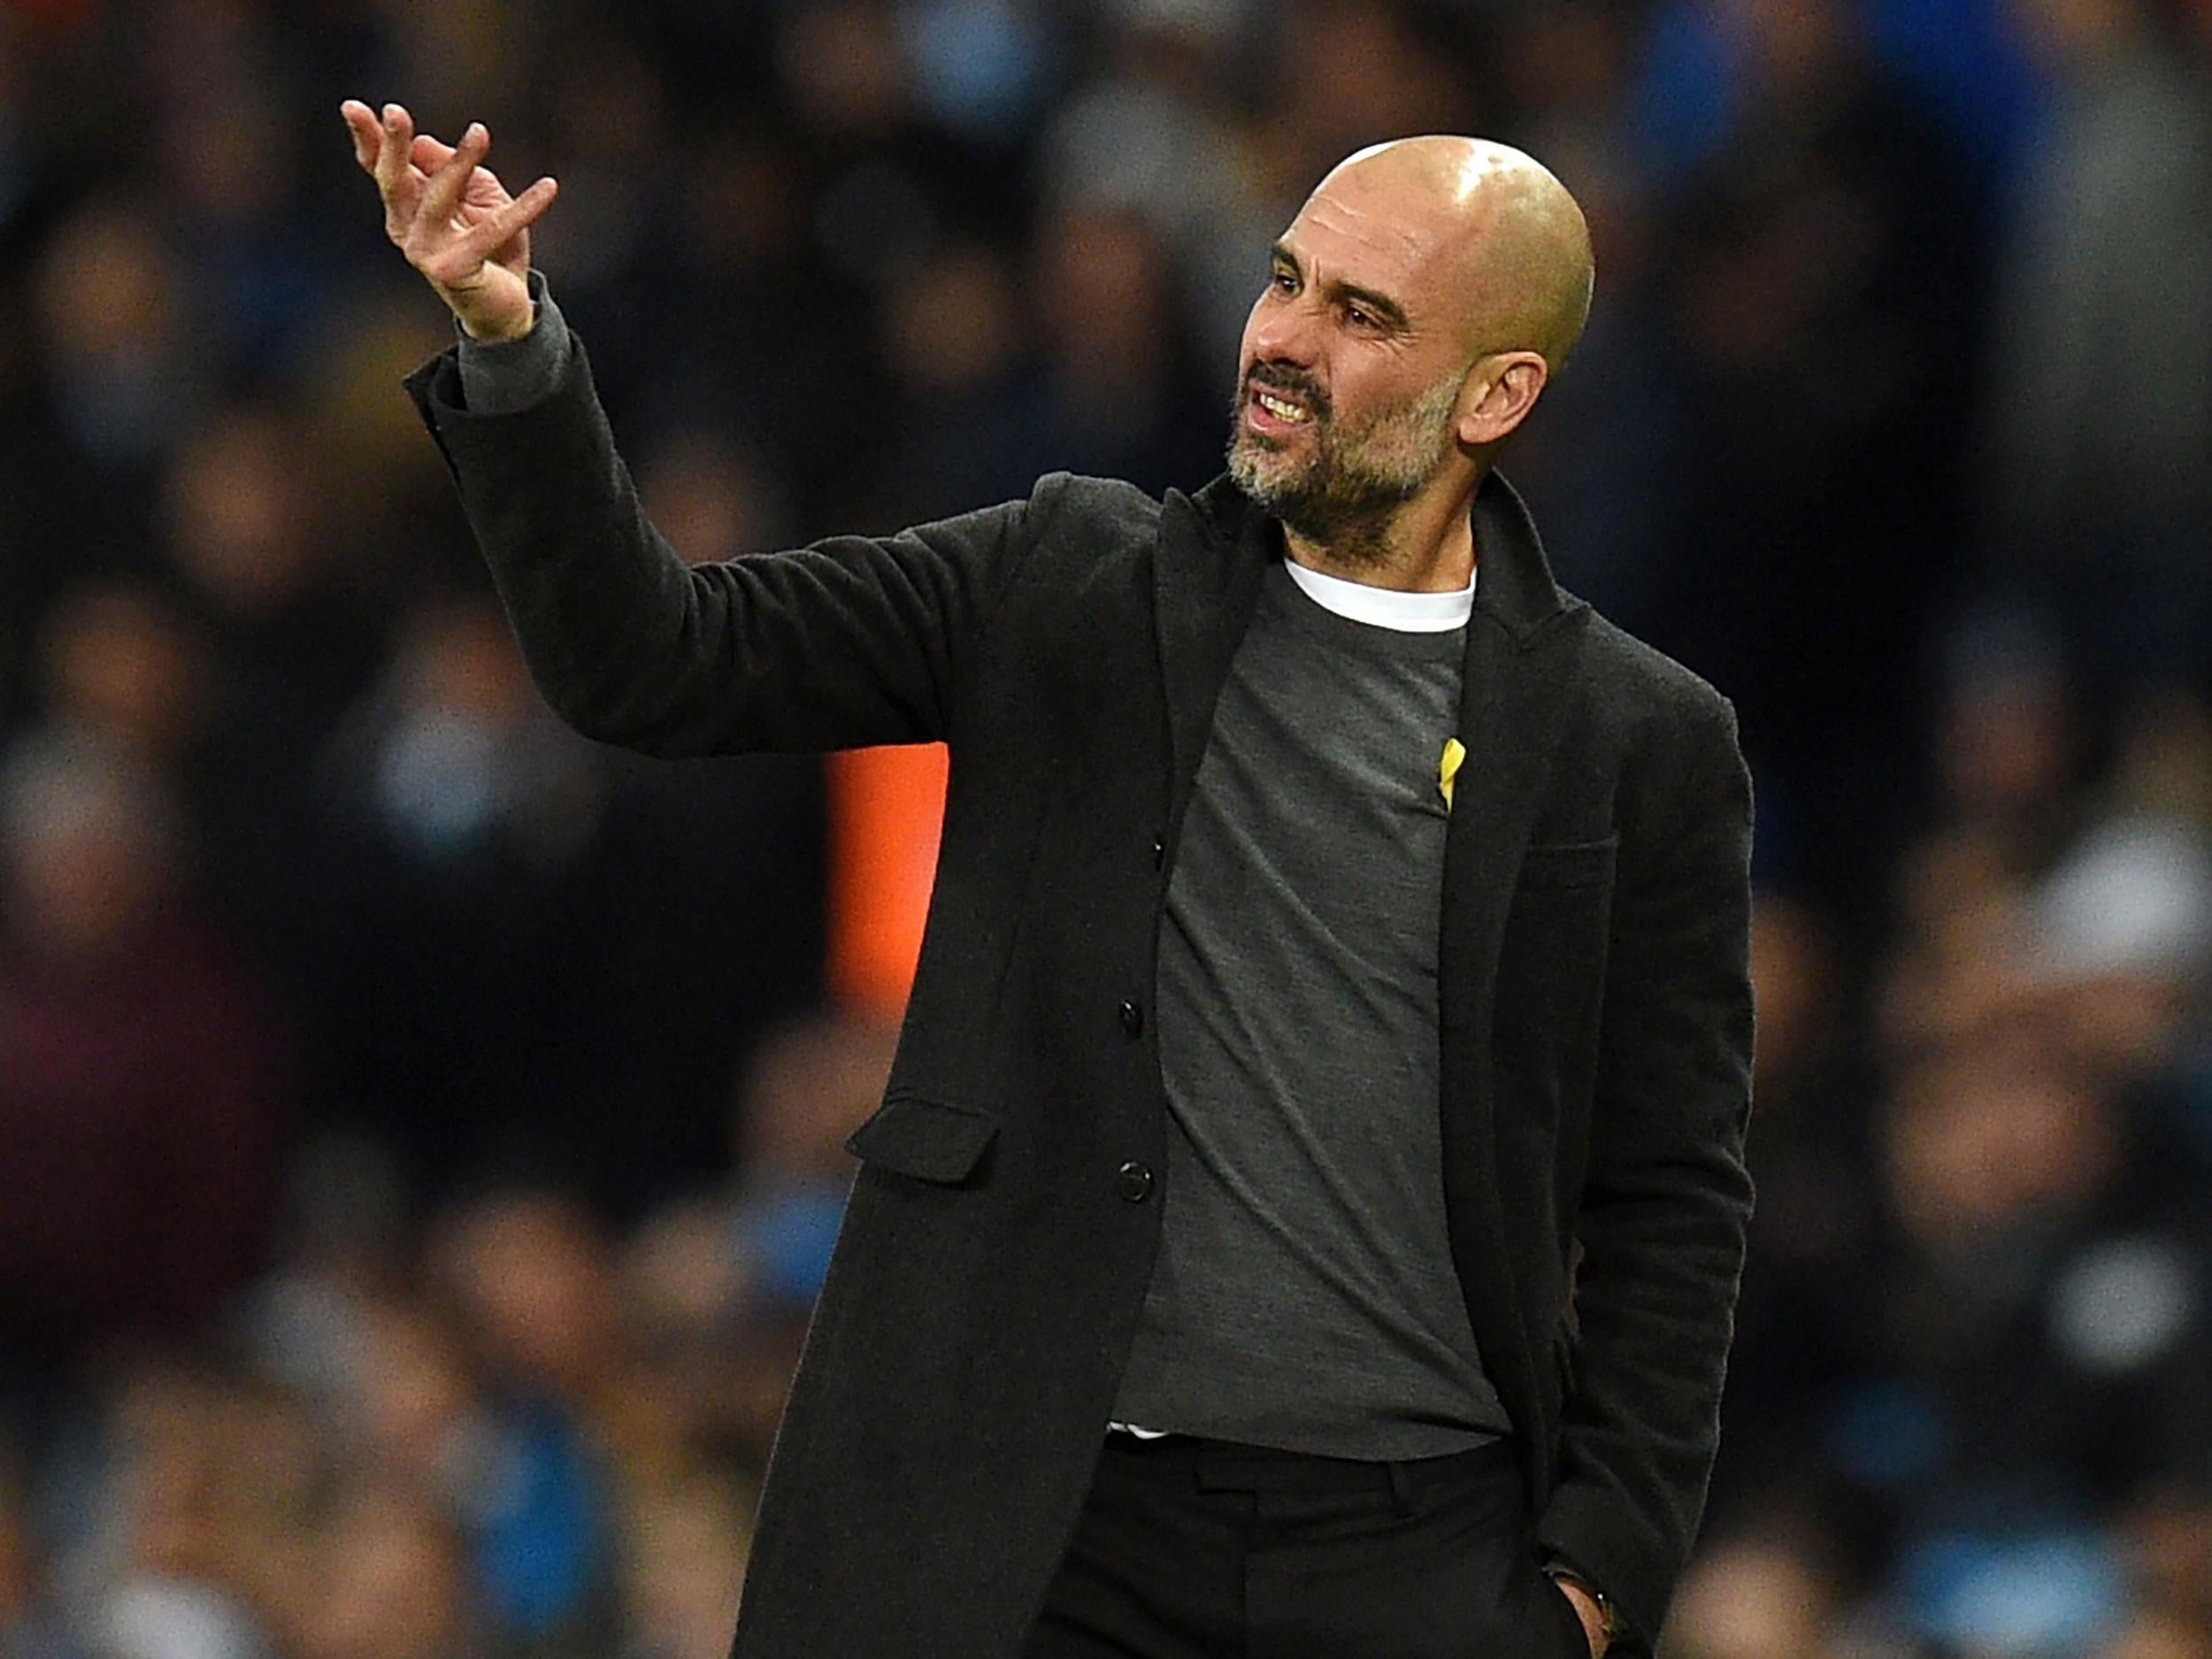 Pep Guardiola criticised his players for 'forgetting to play' in the second half